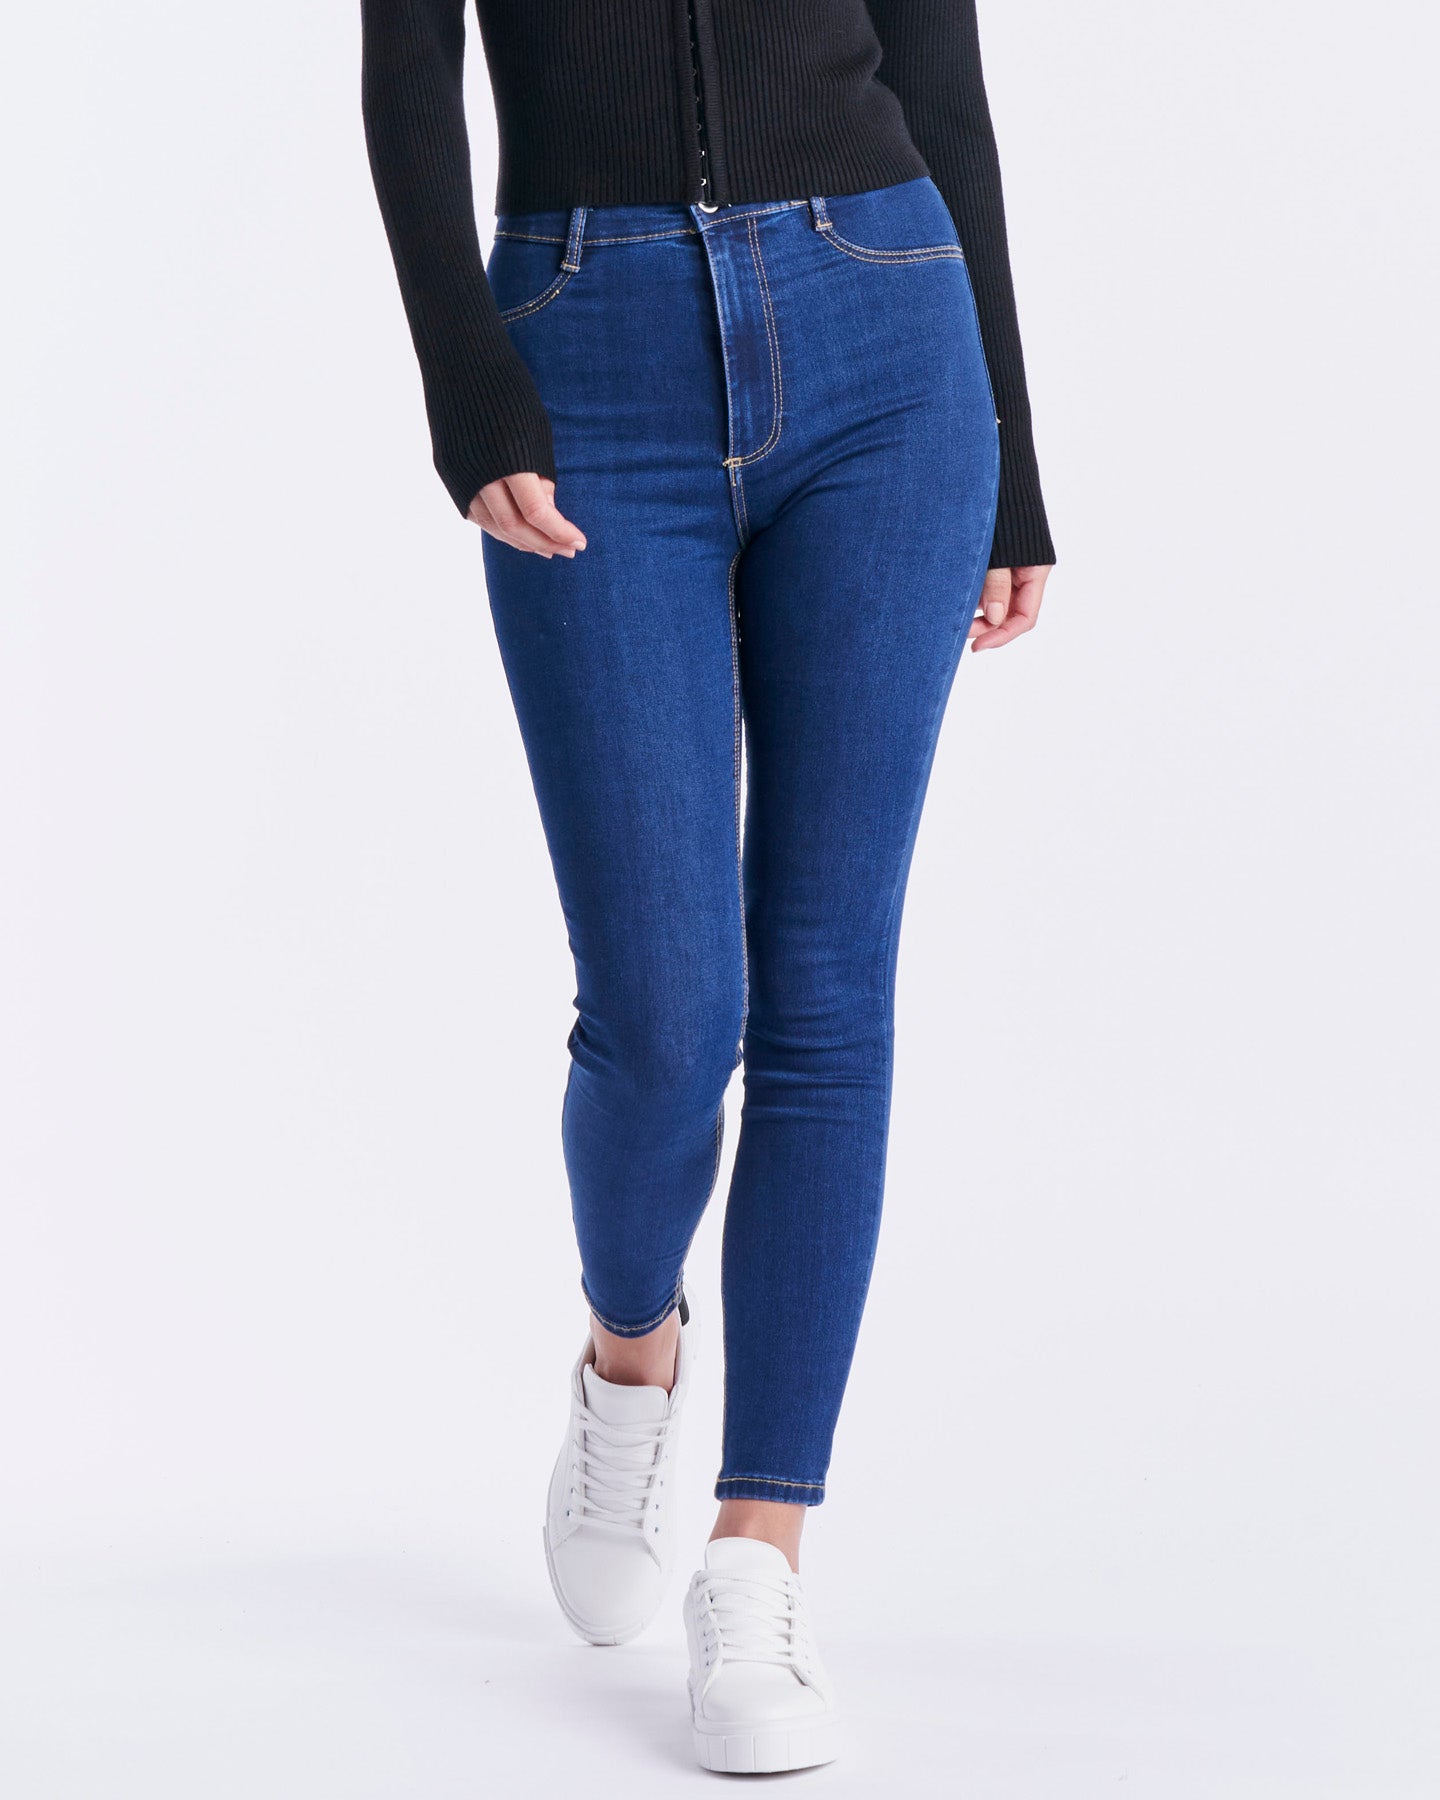 Our Luella jeans are made with body sculpting stretch fabric and special tummy trimming construction. Shop our range of ladies Denim Jeans by SASS online and in-store today! FREE* Express Shipping on Australian Orders over $100. Wear Now, Pay Later with AFTERPAY & ZIP.